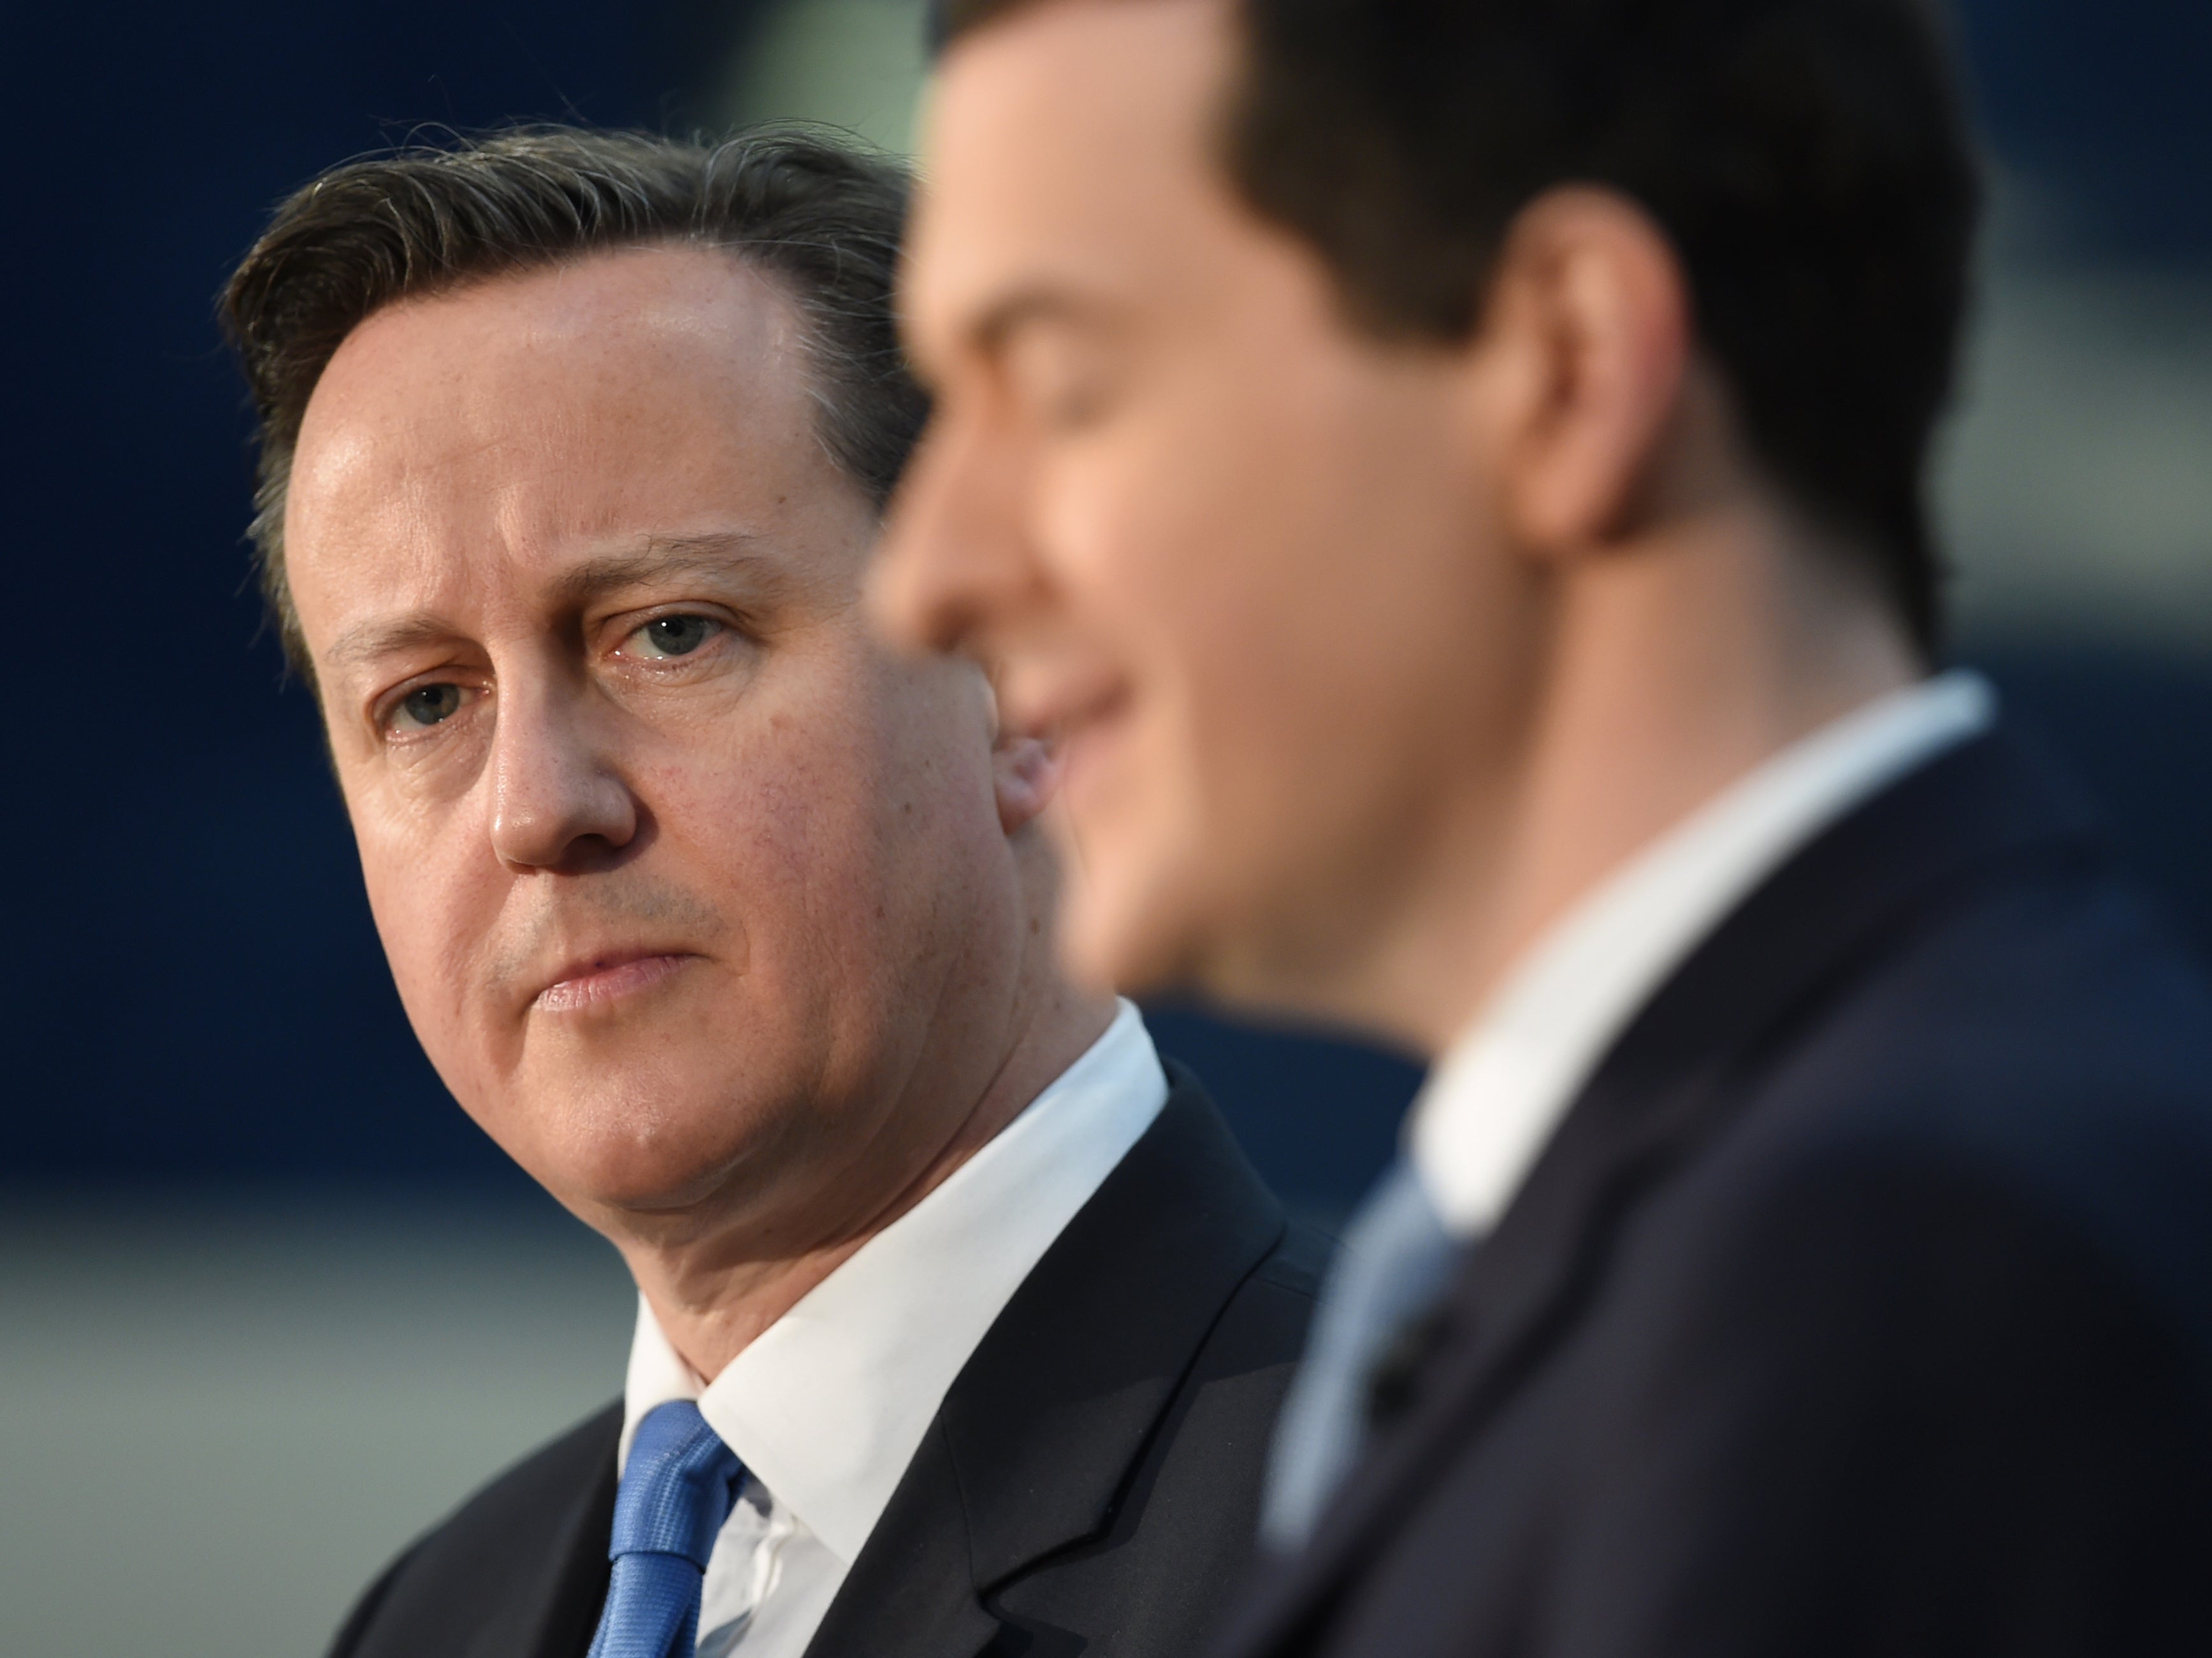 David Cameron and George Osborne have condemned HS2 decision